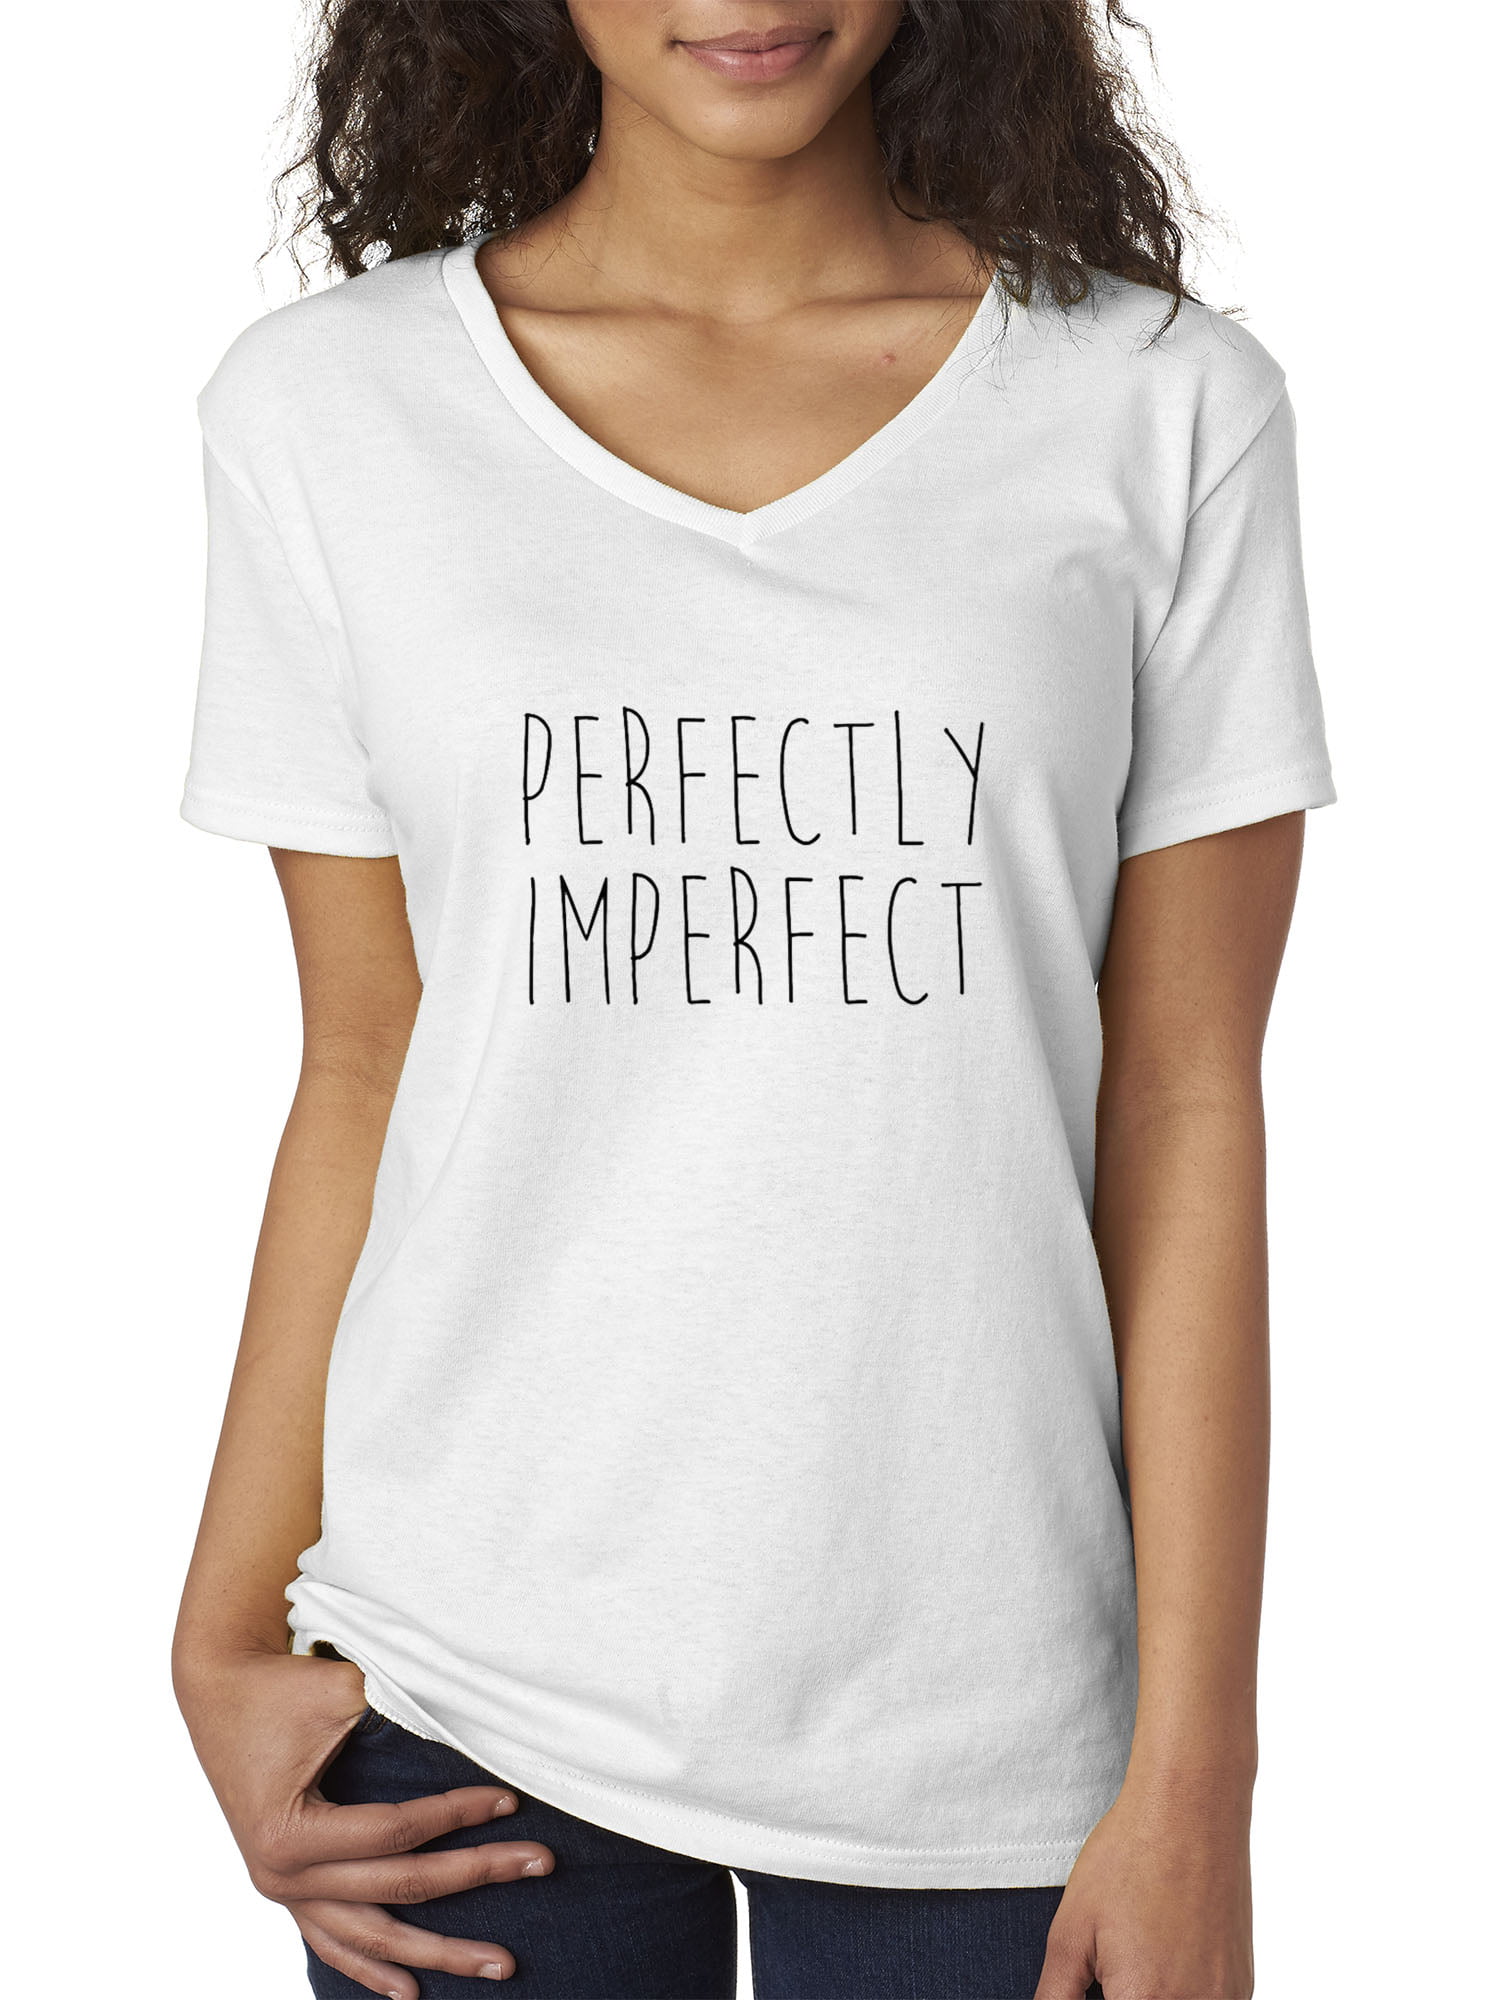 Perfectly Funny Imperfect Retro UniSex Gift Novelty Blouse Ladie/'s T-Shirt Top